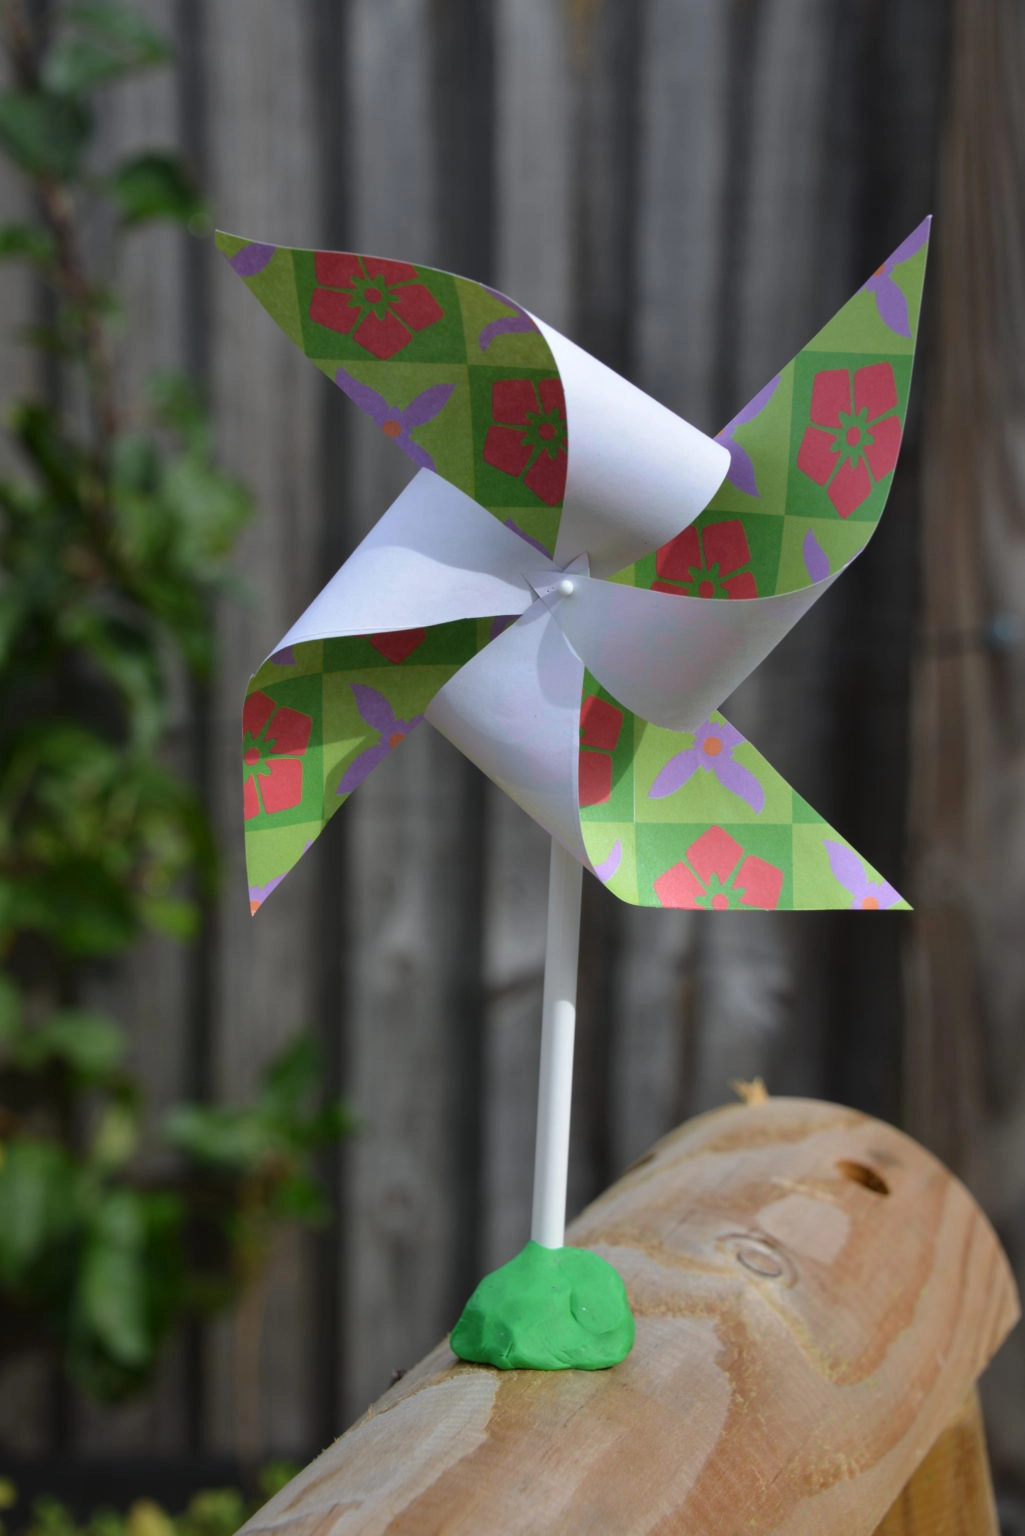 Learn about the power of wind by creating a pinwheel.